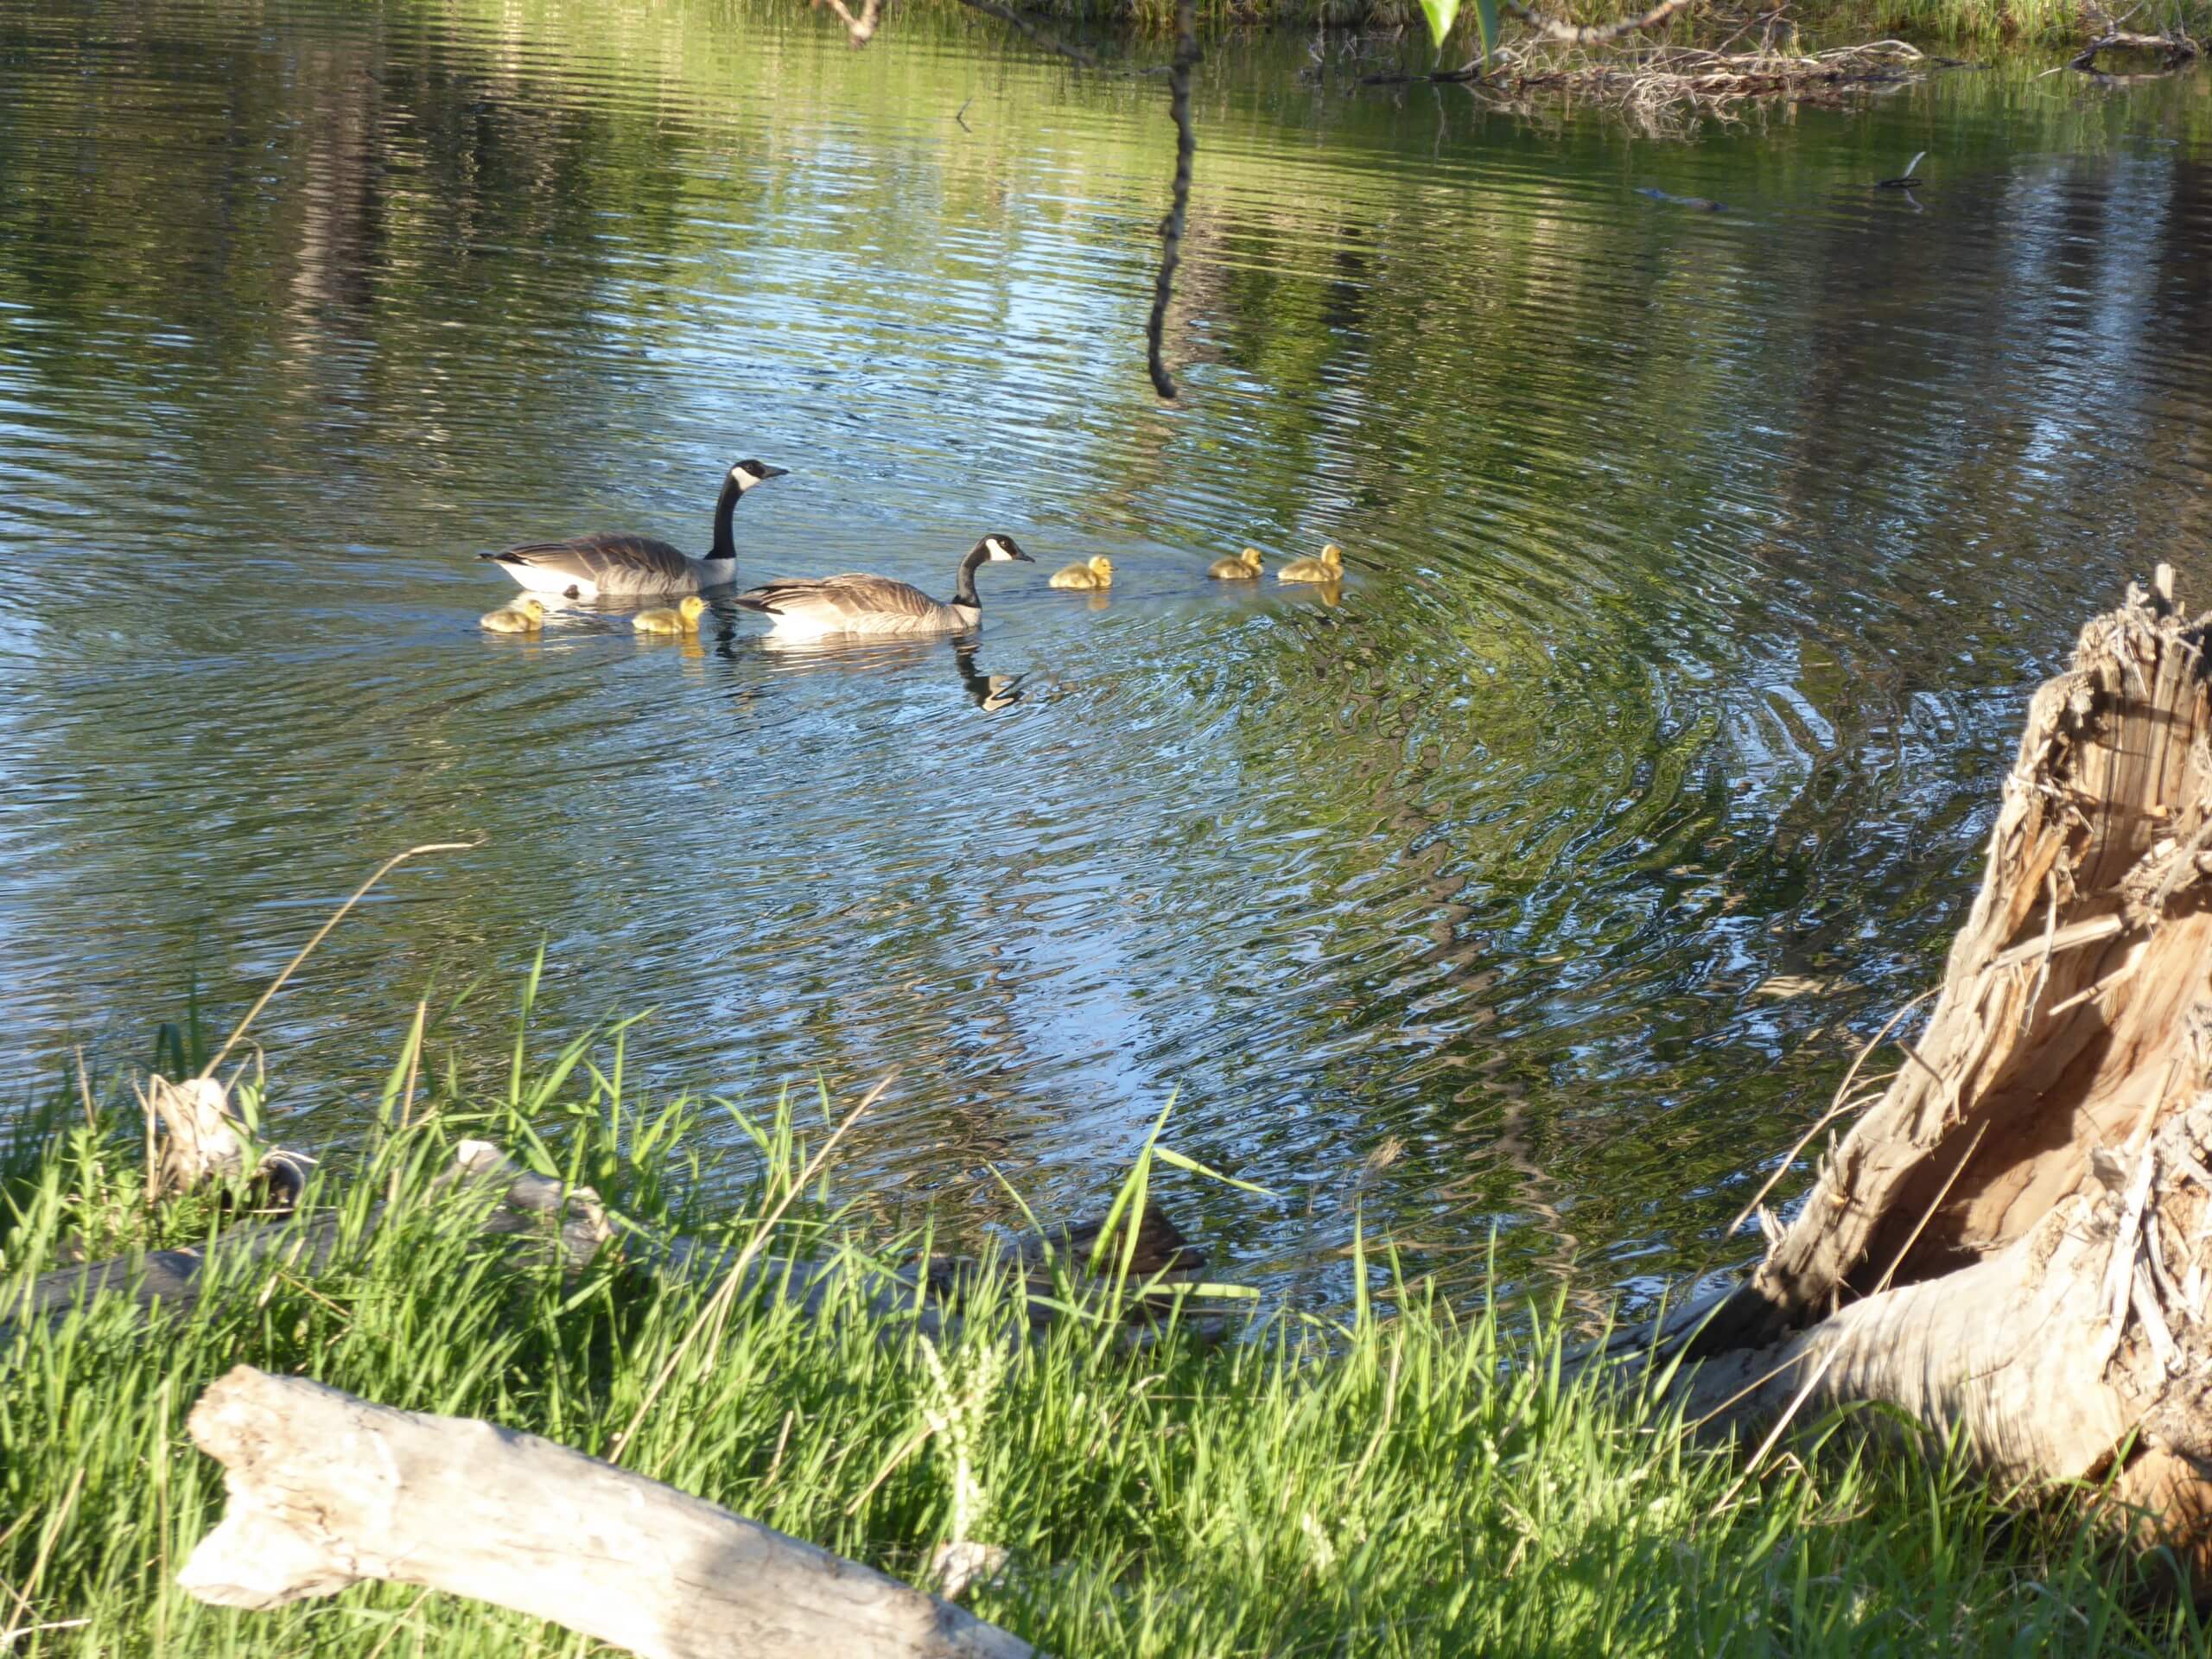 Canada geese with goslings in Inglewood Bird Sanctuary seen on May